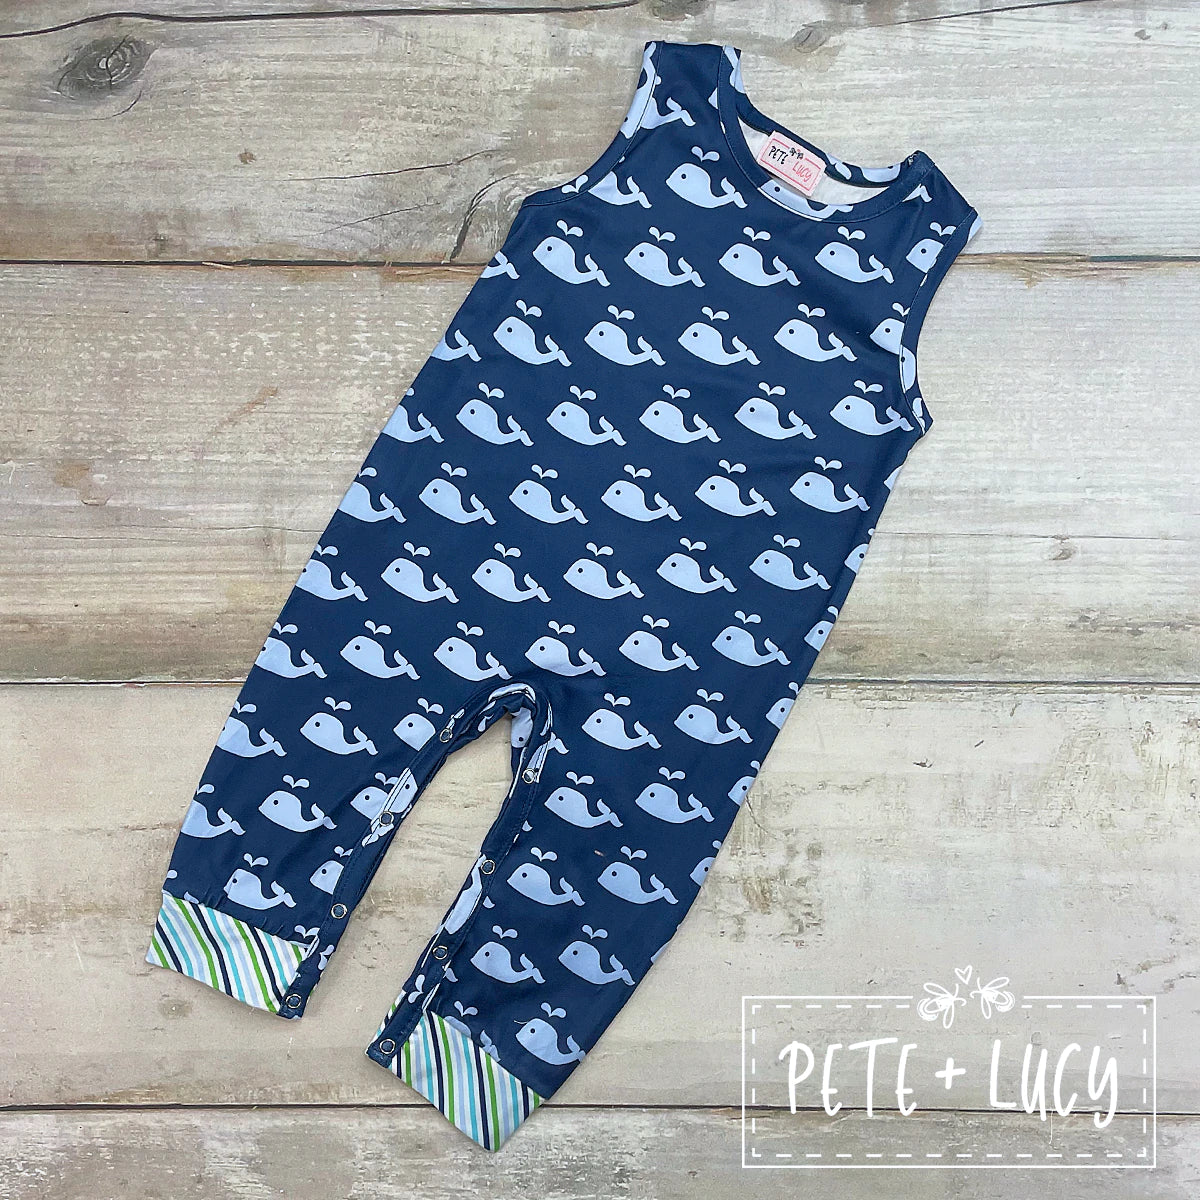 Whale of a Time-Boys infant Romper